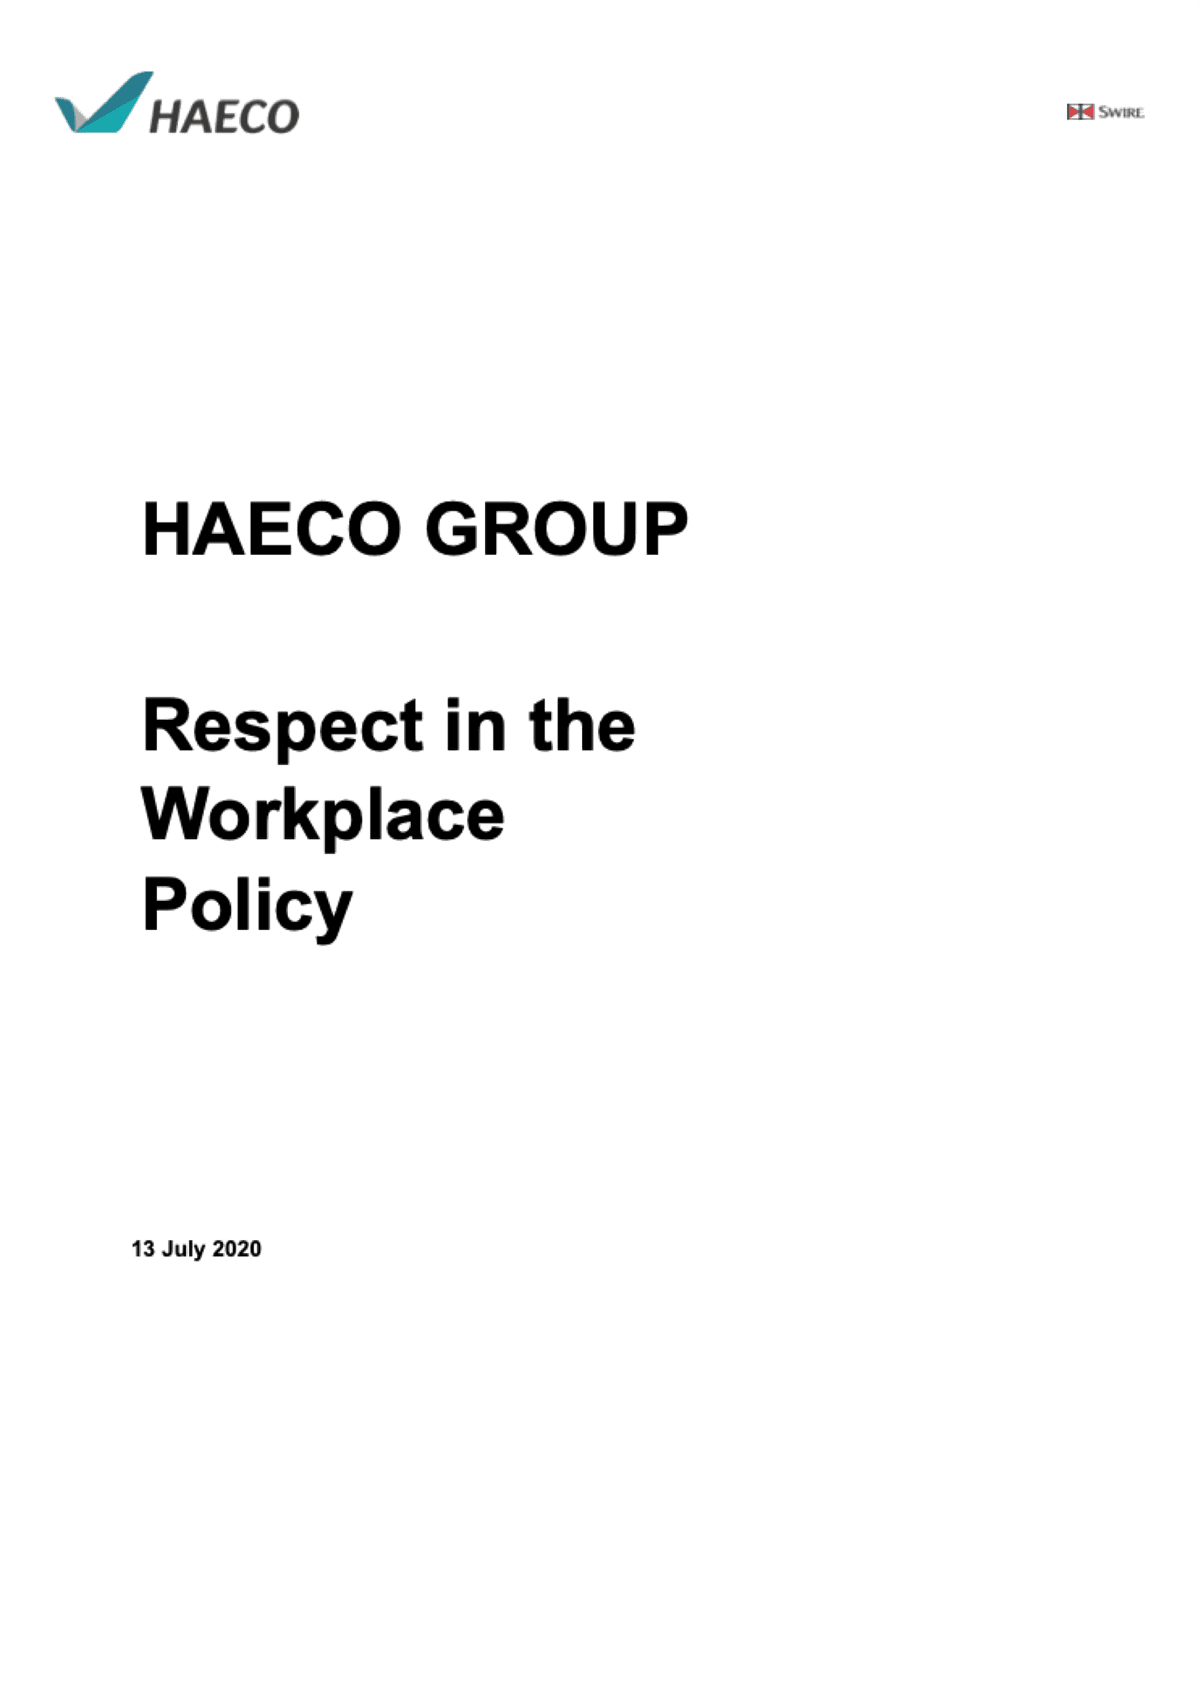 Respect in the Workplace Policy